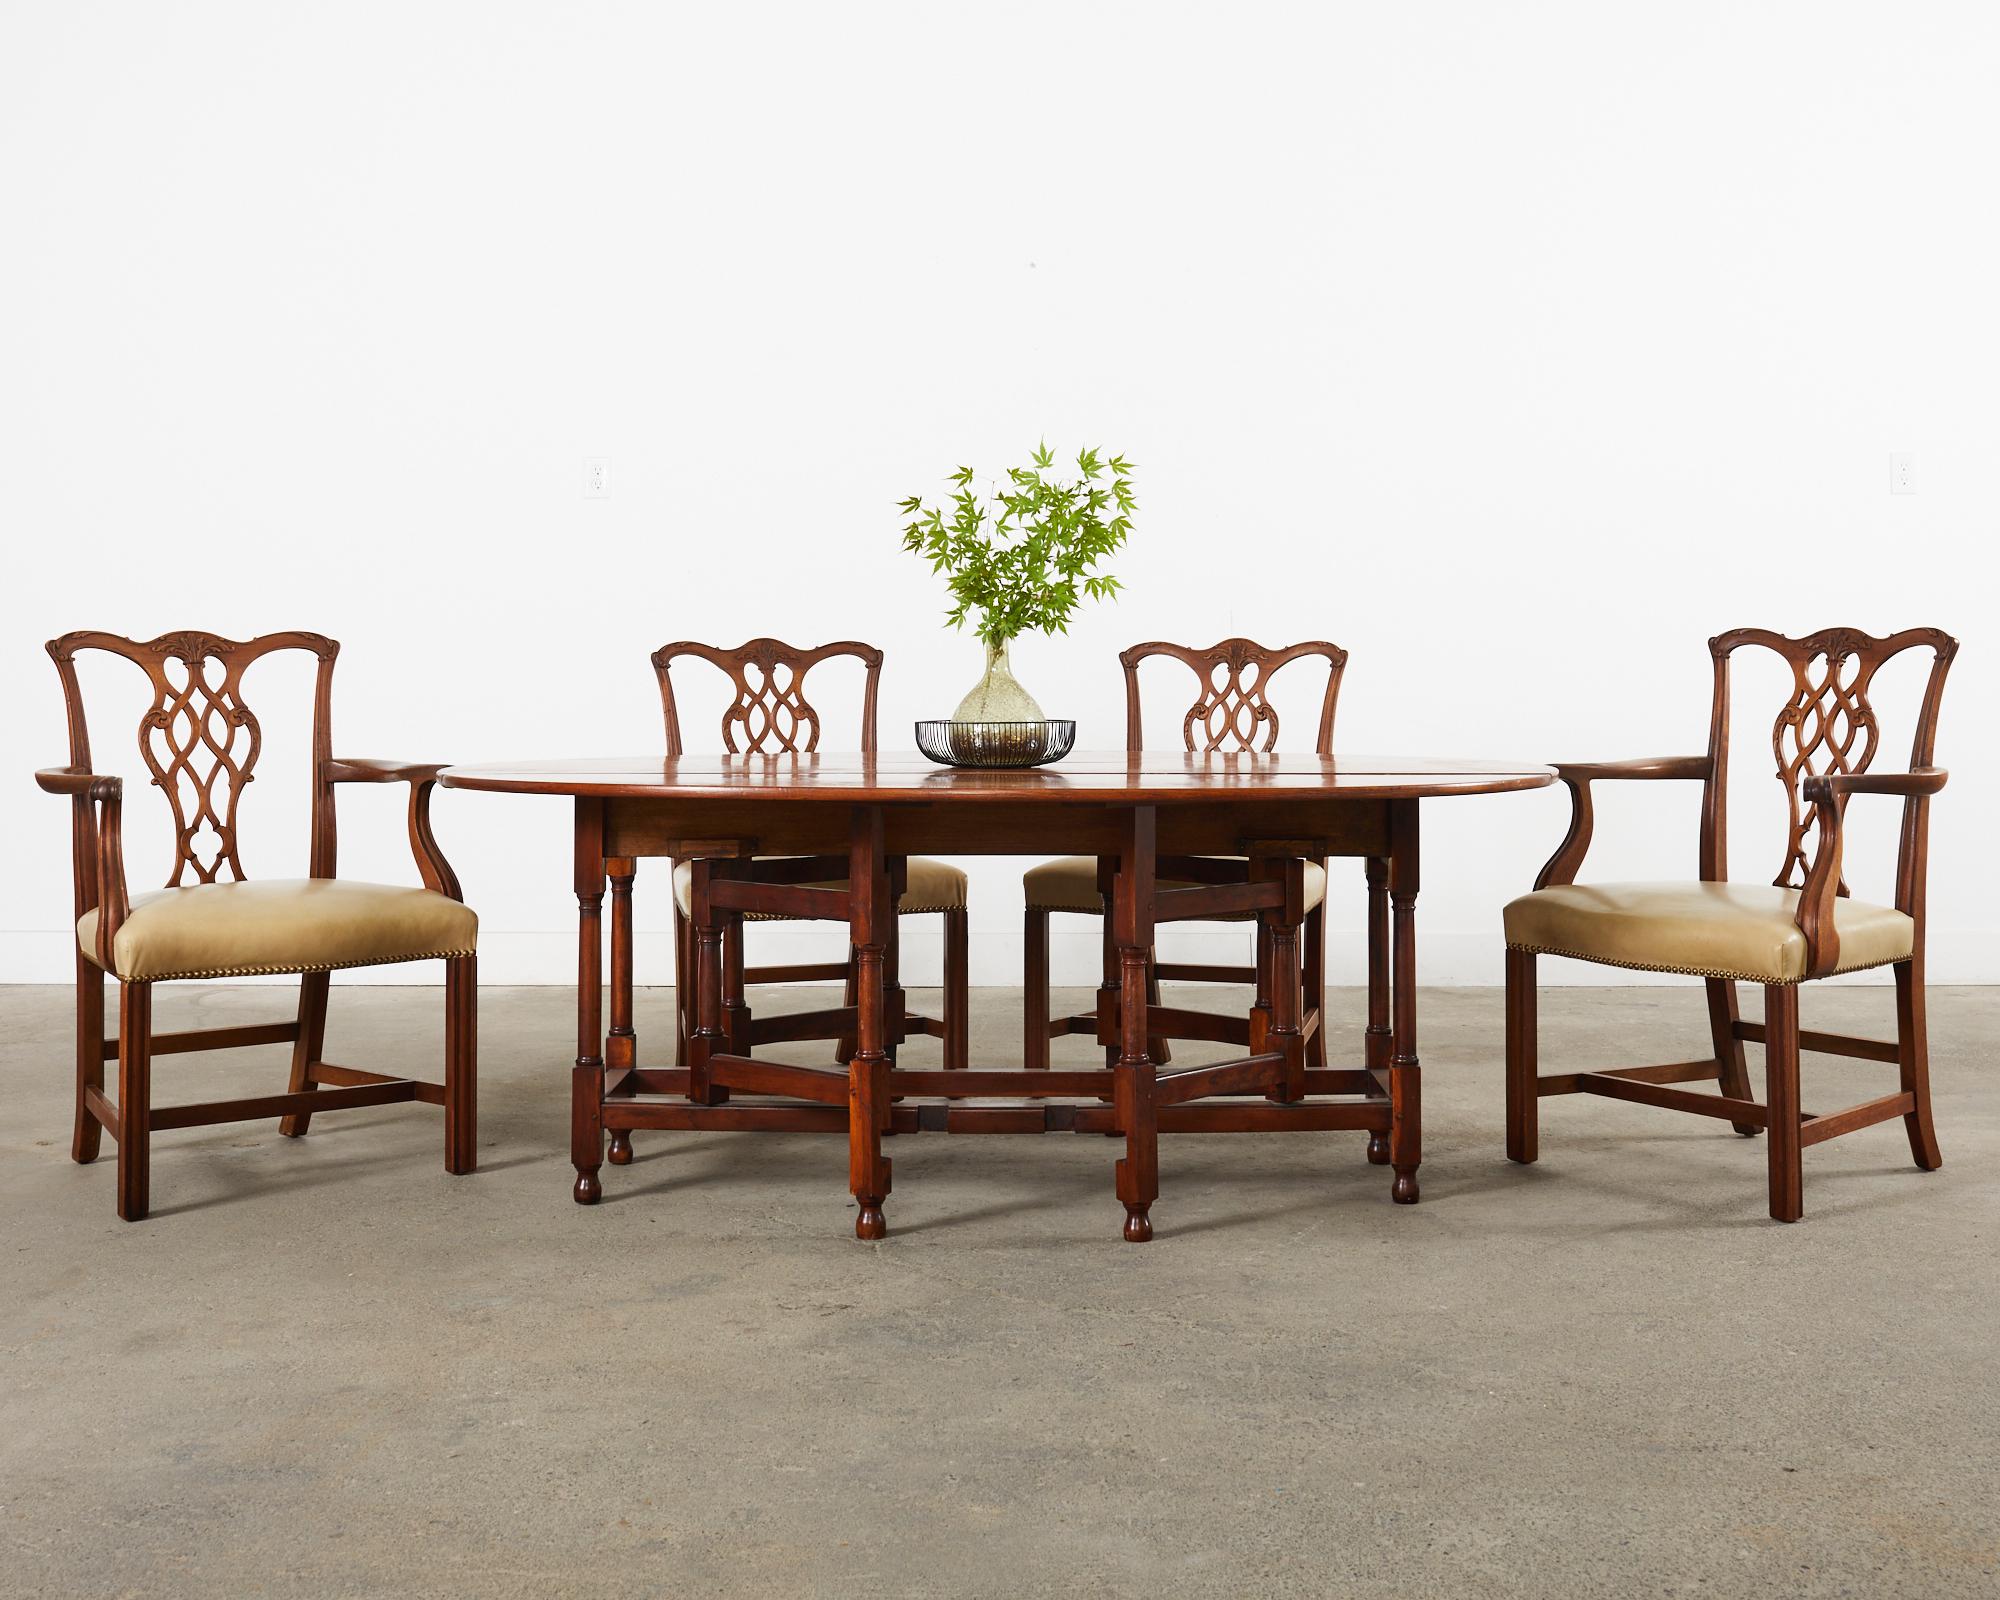 Gorgeous set of eight hand-carved mahogany dining chairs crafted in the English Georgian or Thomas Chippendale taste. The set consists of six side chairs and two host armchairs measuring 26.5 inches wide. The chairs have a dramatic bow shaped crest